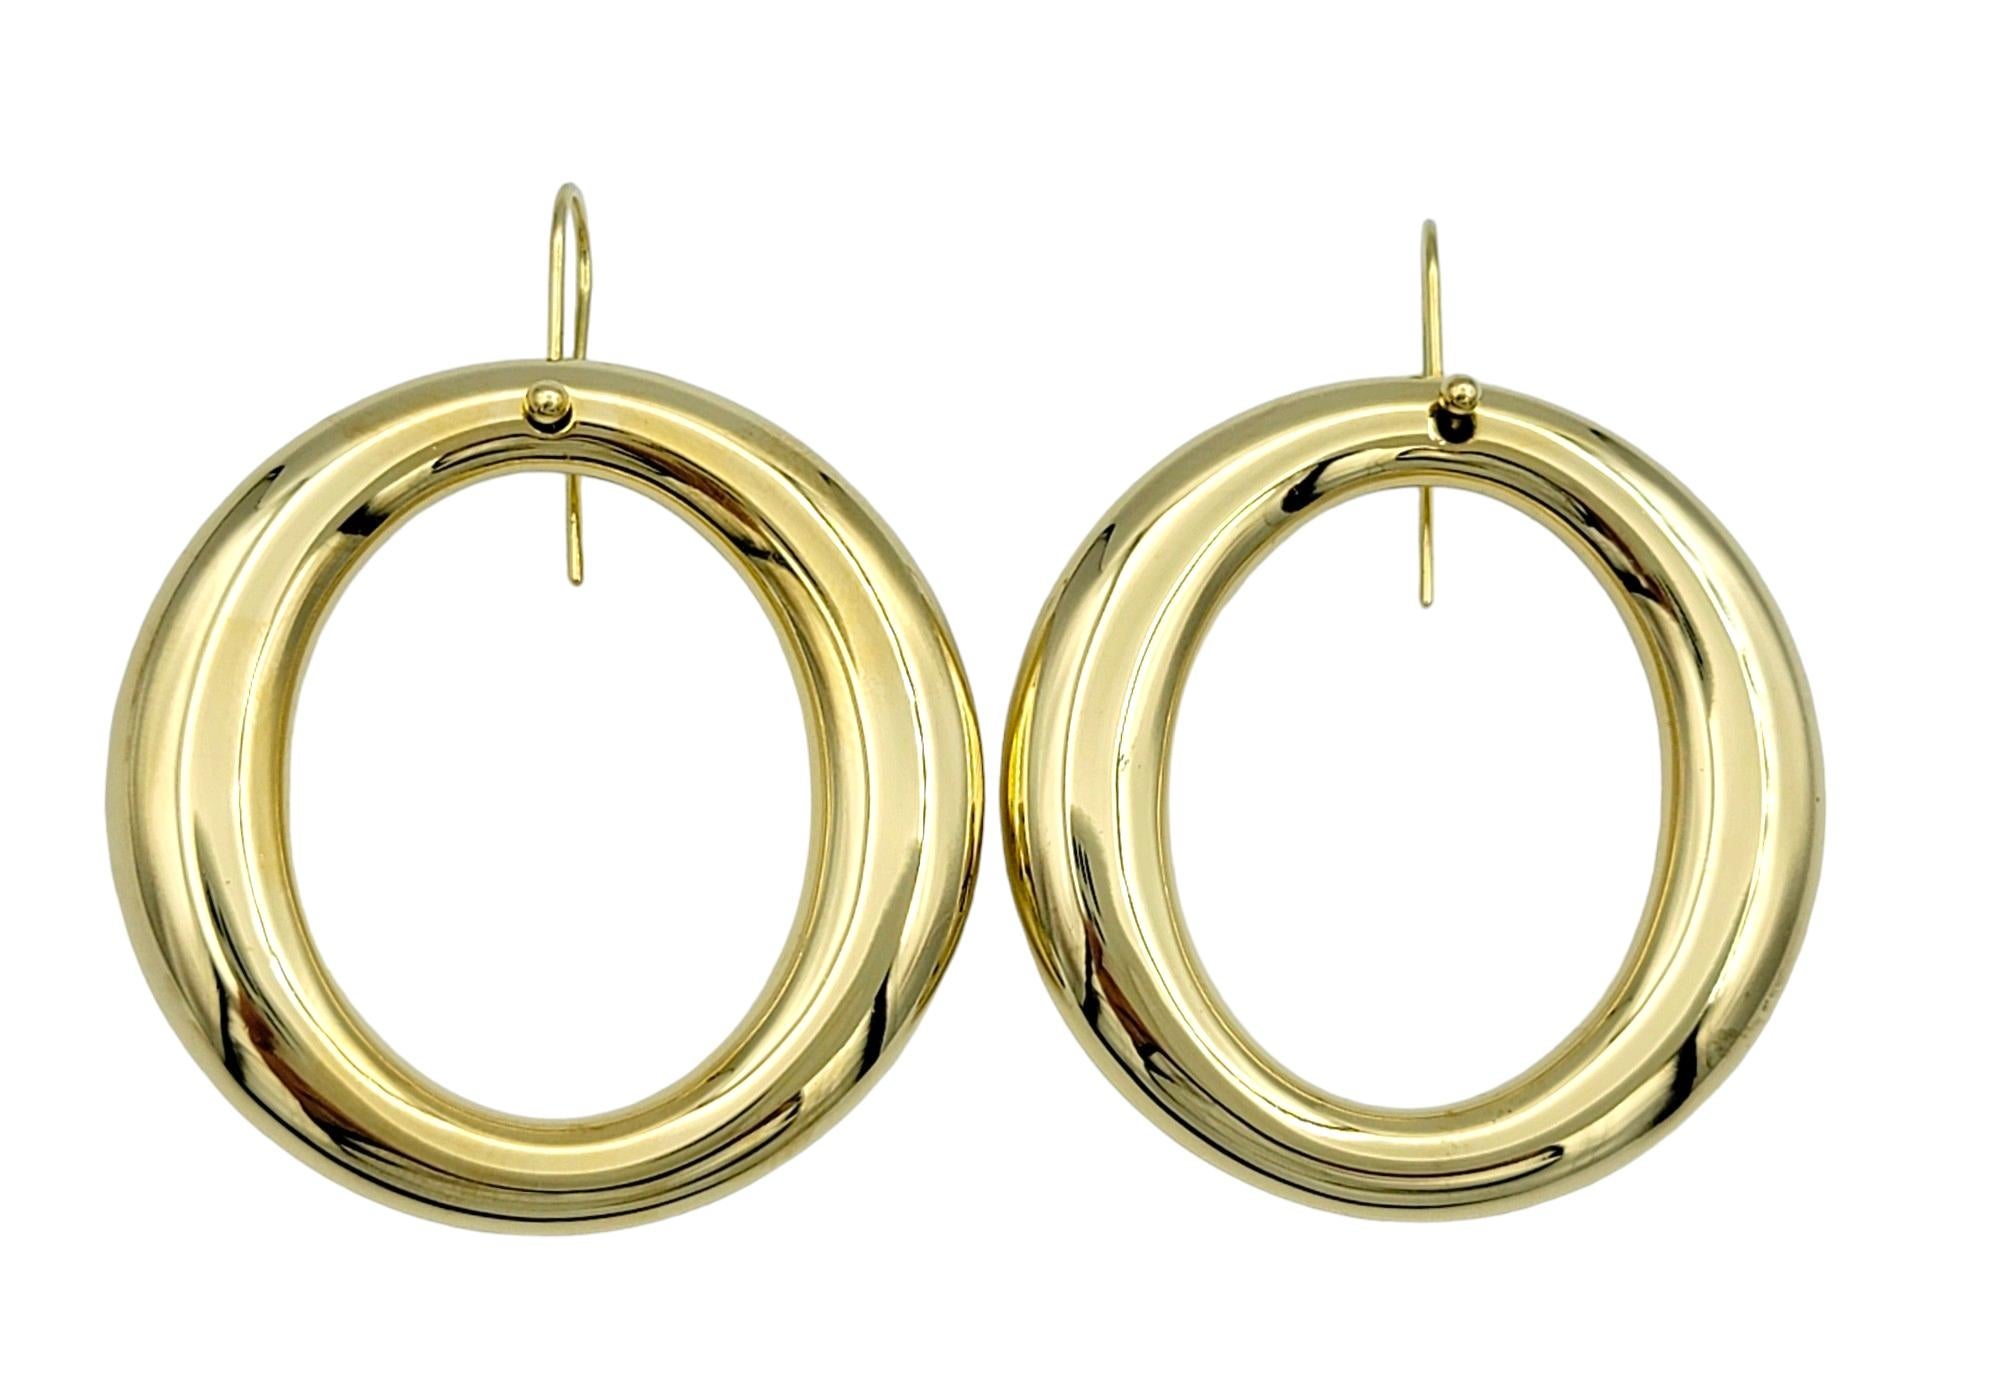 These elegant earrings from Tiffany & Co.'s Elsa Peretti Sevillana collection feature a timeless open circle design, and set in lustrous 18 karat yellow gold. The simplicity of the design is elevated by the luxuriousness of the gold, creating a